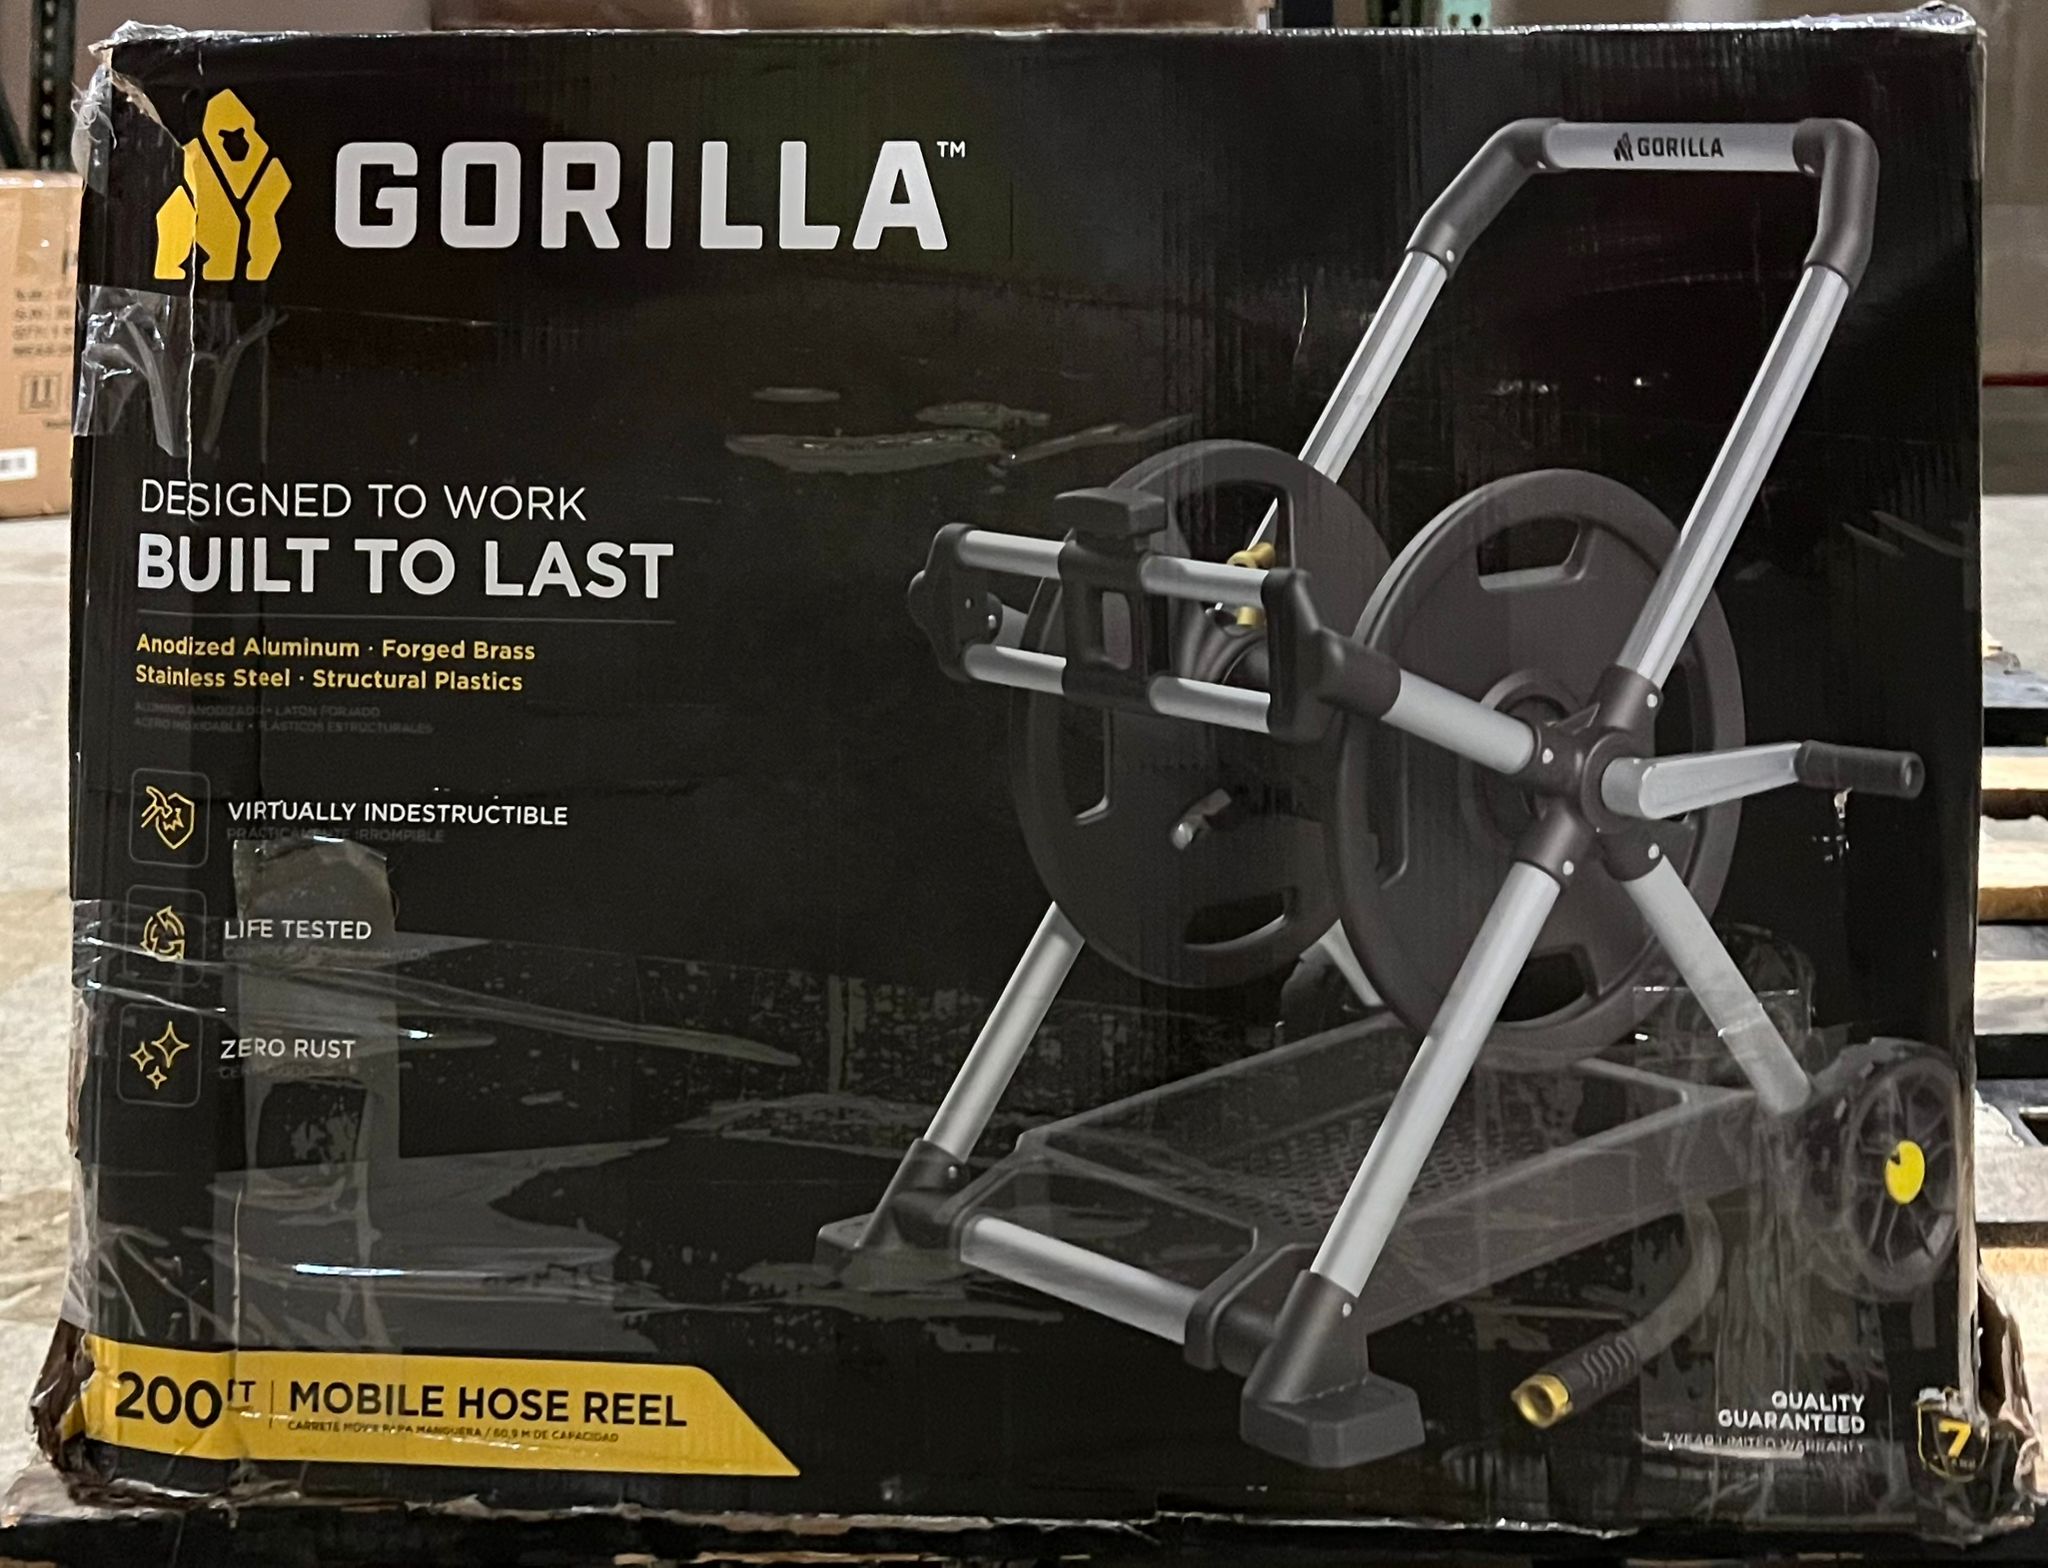 Gorilla Hose Reels - Virtually indestructible - built with high-strength  materials